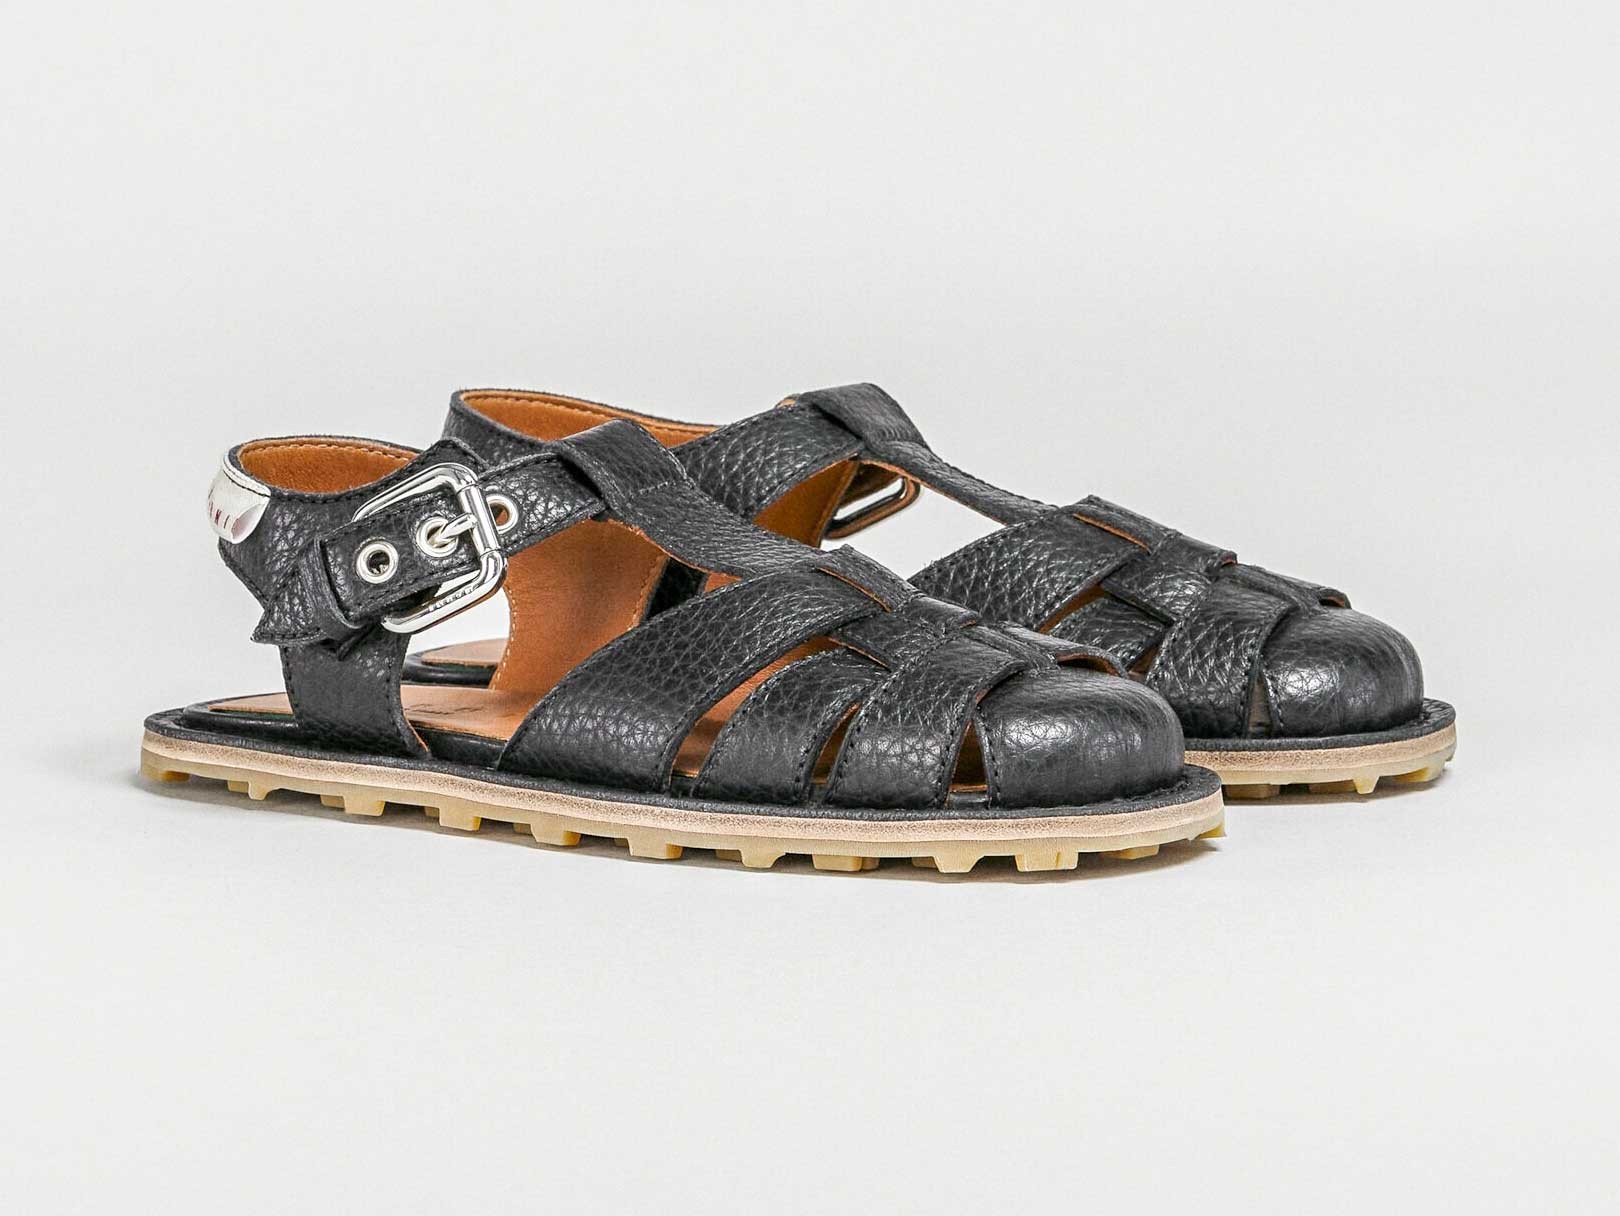 Crabeater or franciscan sandals, will they be the favorite summer sandals?